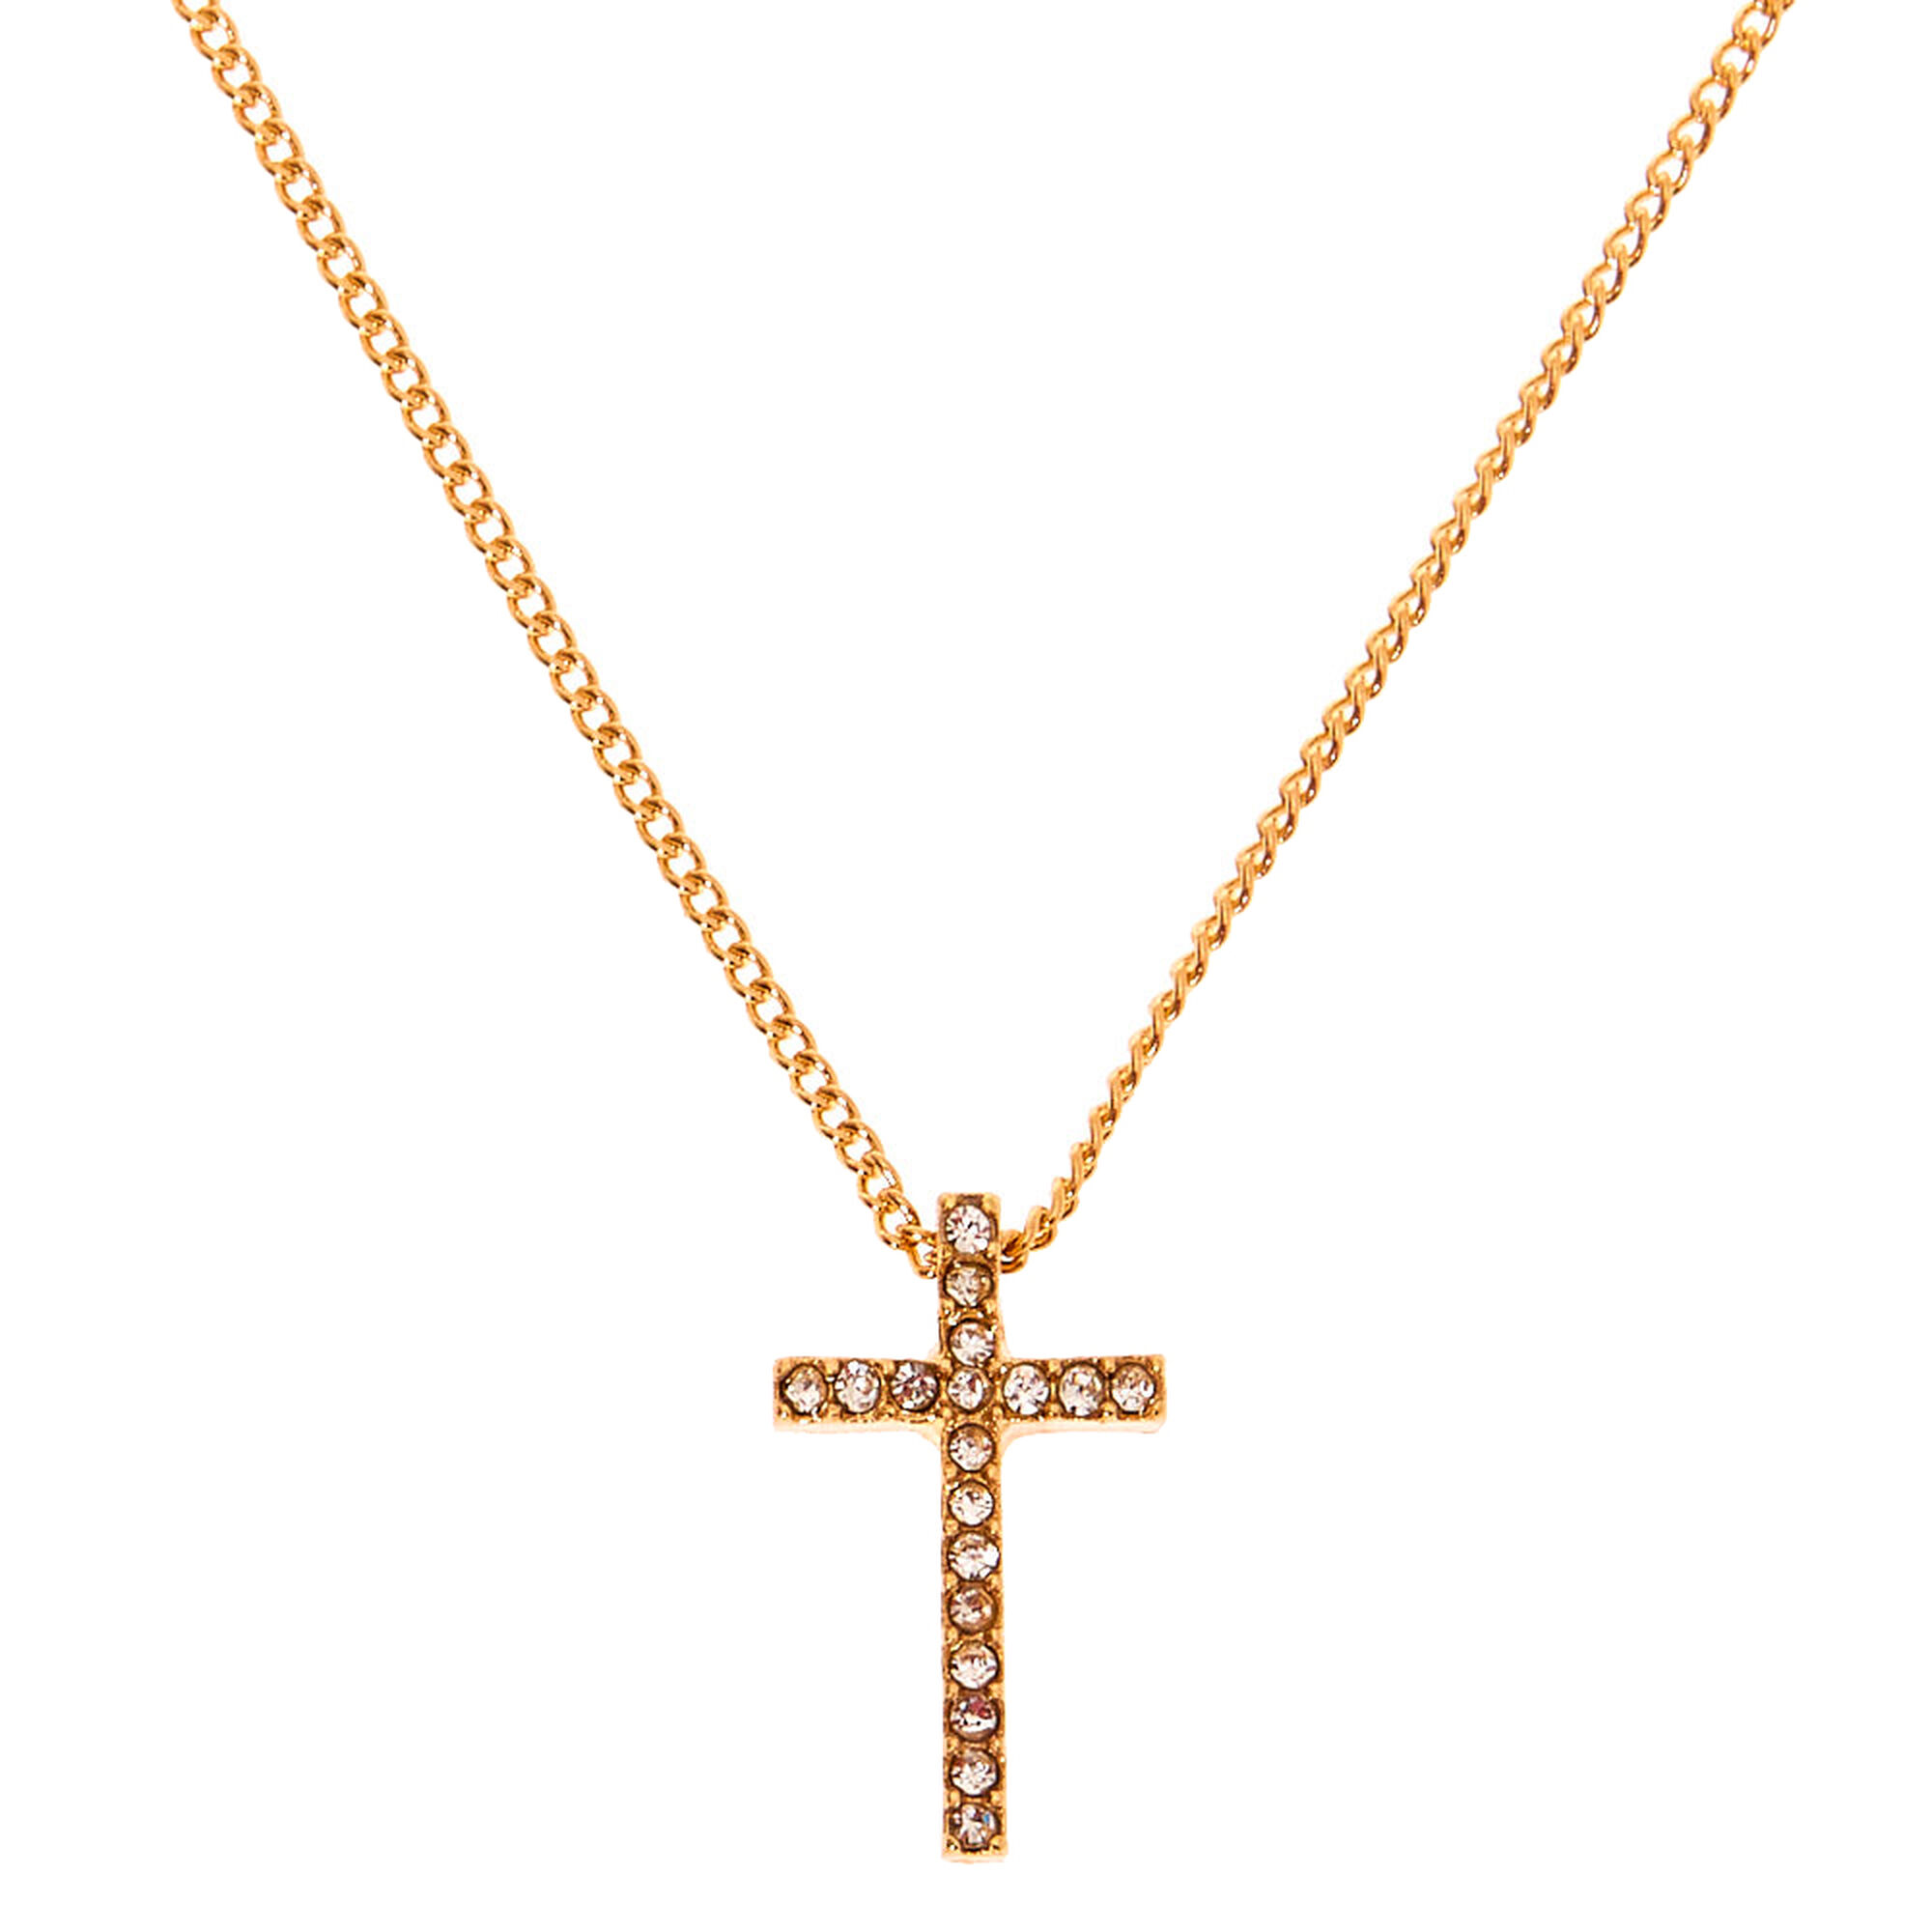 View Claires Cross Pendant Necklace Gold information